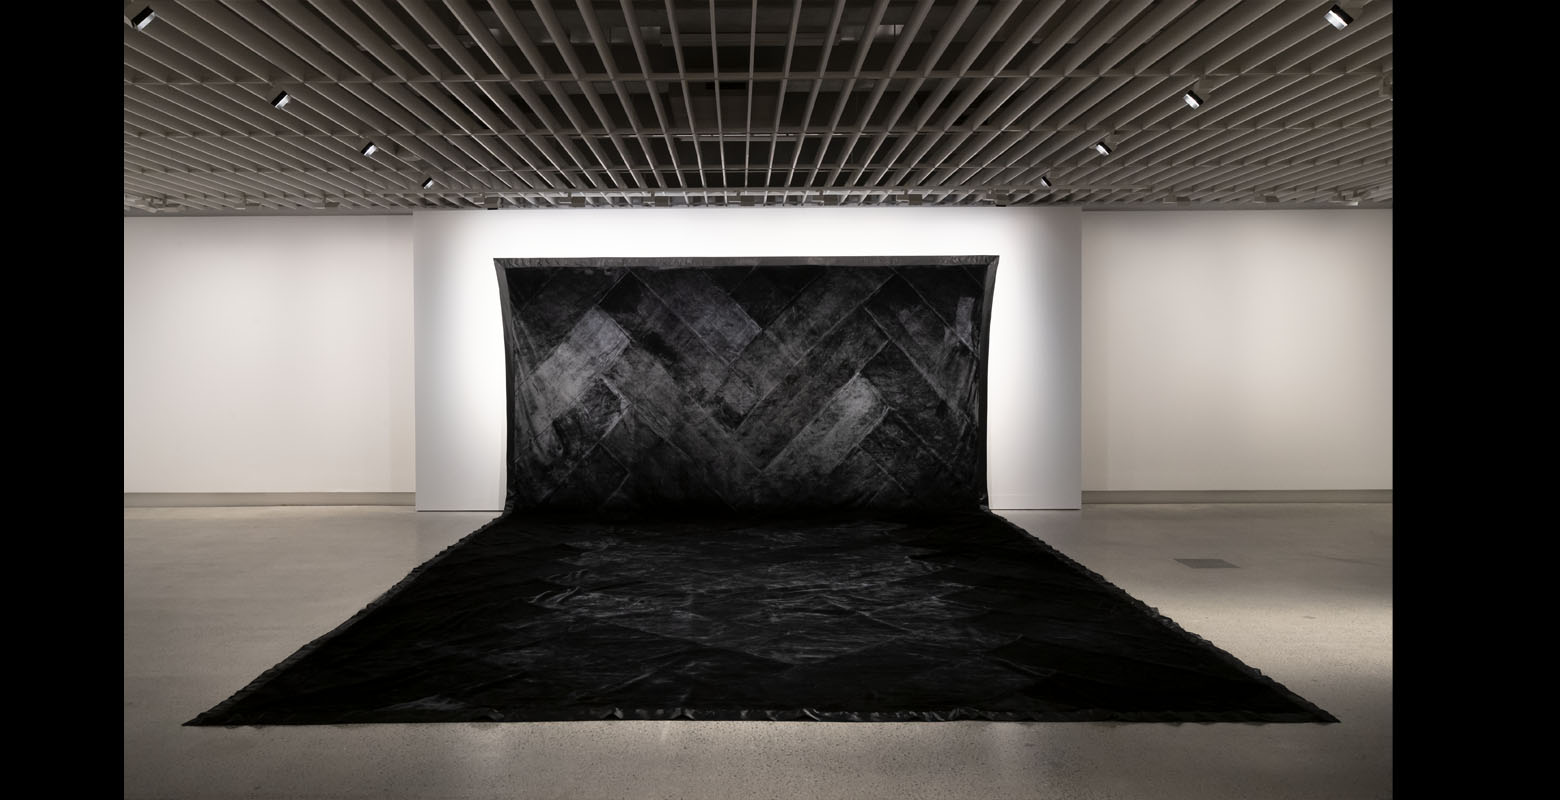 Multiple black blankets are sewn together to form a giant blanket, which hang from a wall and drapes over the floor. The blankets are stitched together diagonally, forming mountain-like patterns.